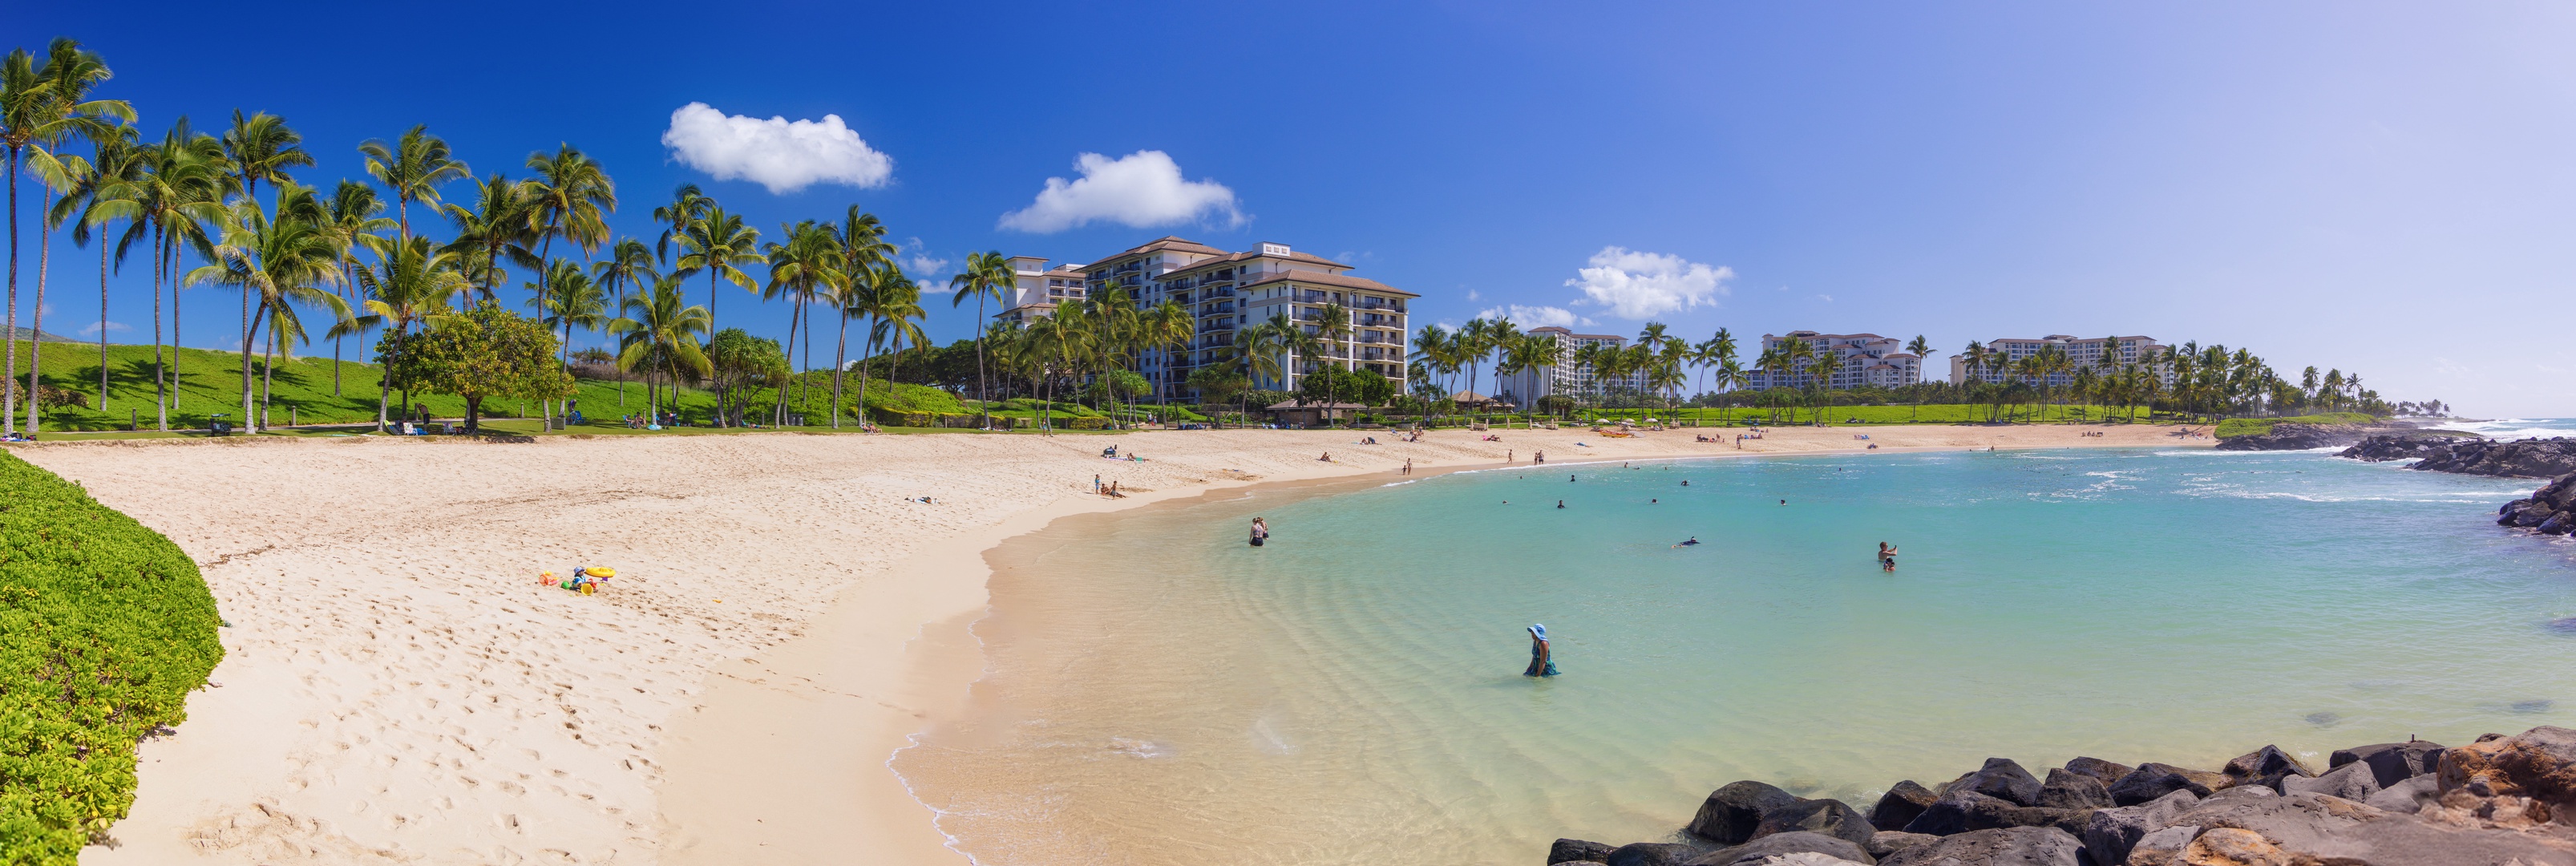 Kapolei Vacation Rentals, Ko Olina Kai 1083C - The private lagoon at Ko Olina is the perfect place for a relaxing afternoon in the sun.